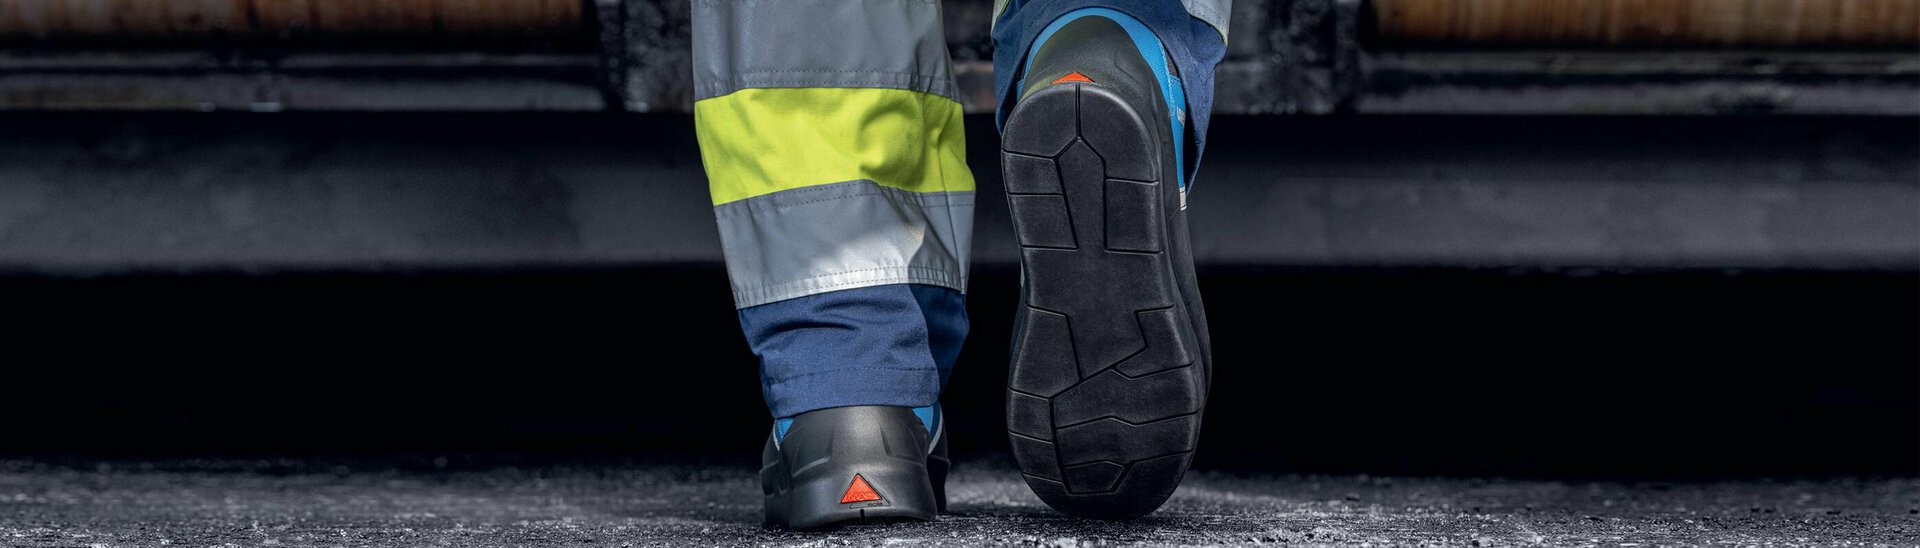 Safety boot S3 with flat sole profile especially for asphalt work